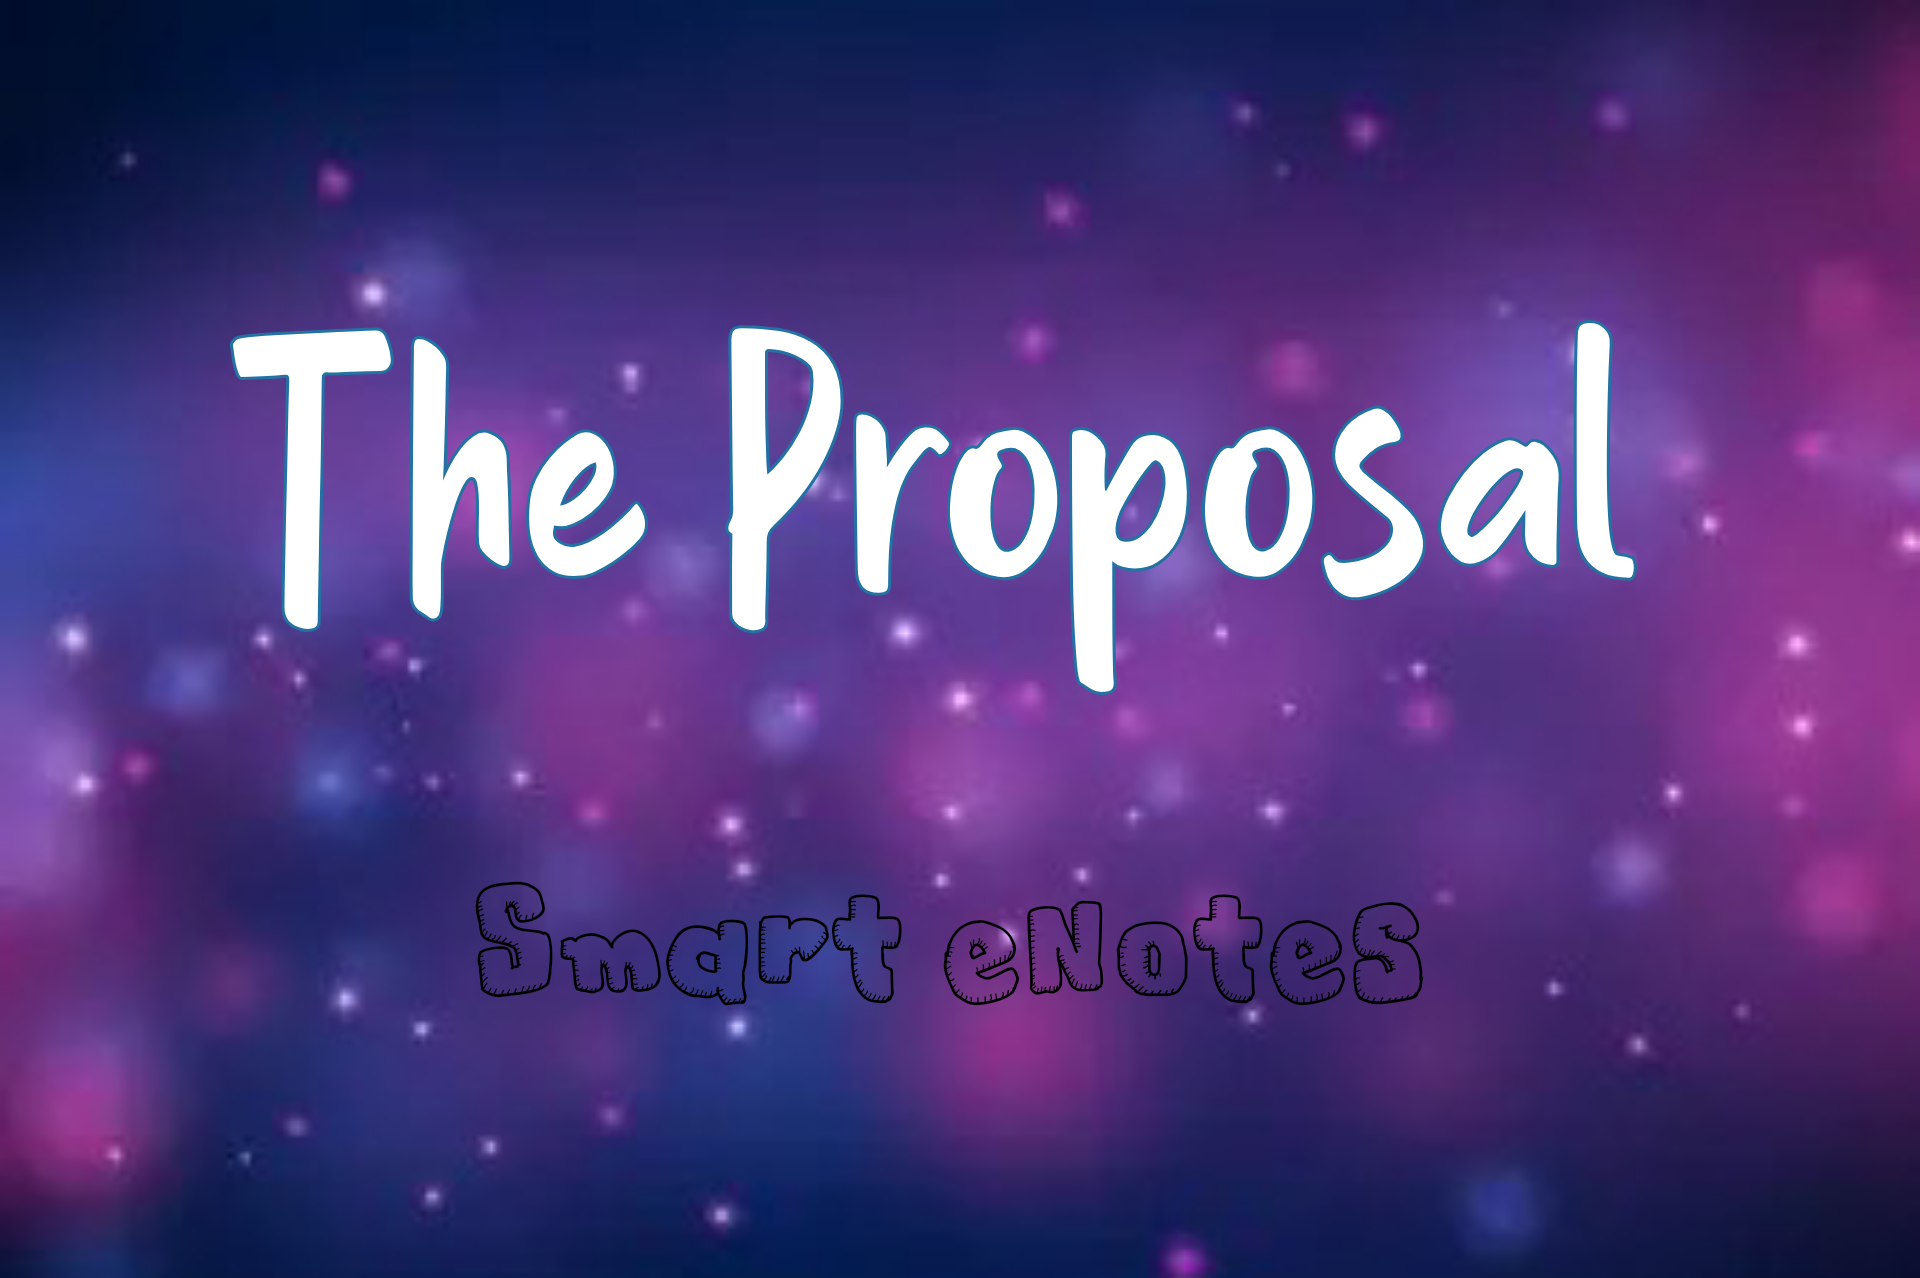 The Proposal by Anton Chekhov - Summary, Characters and Questions Answers | Class 10 Tulip English 5